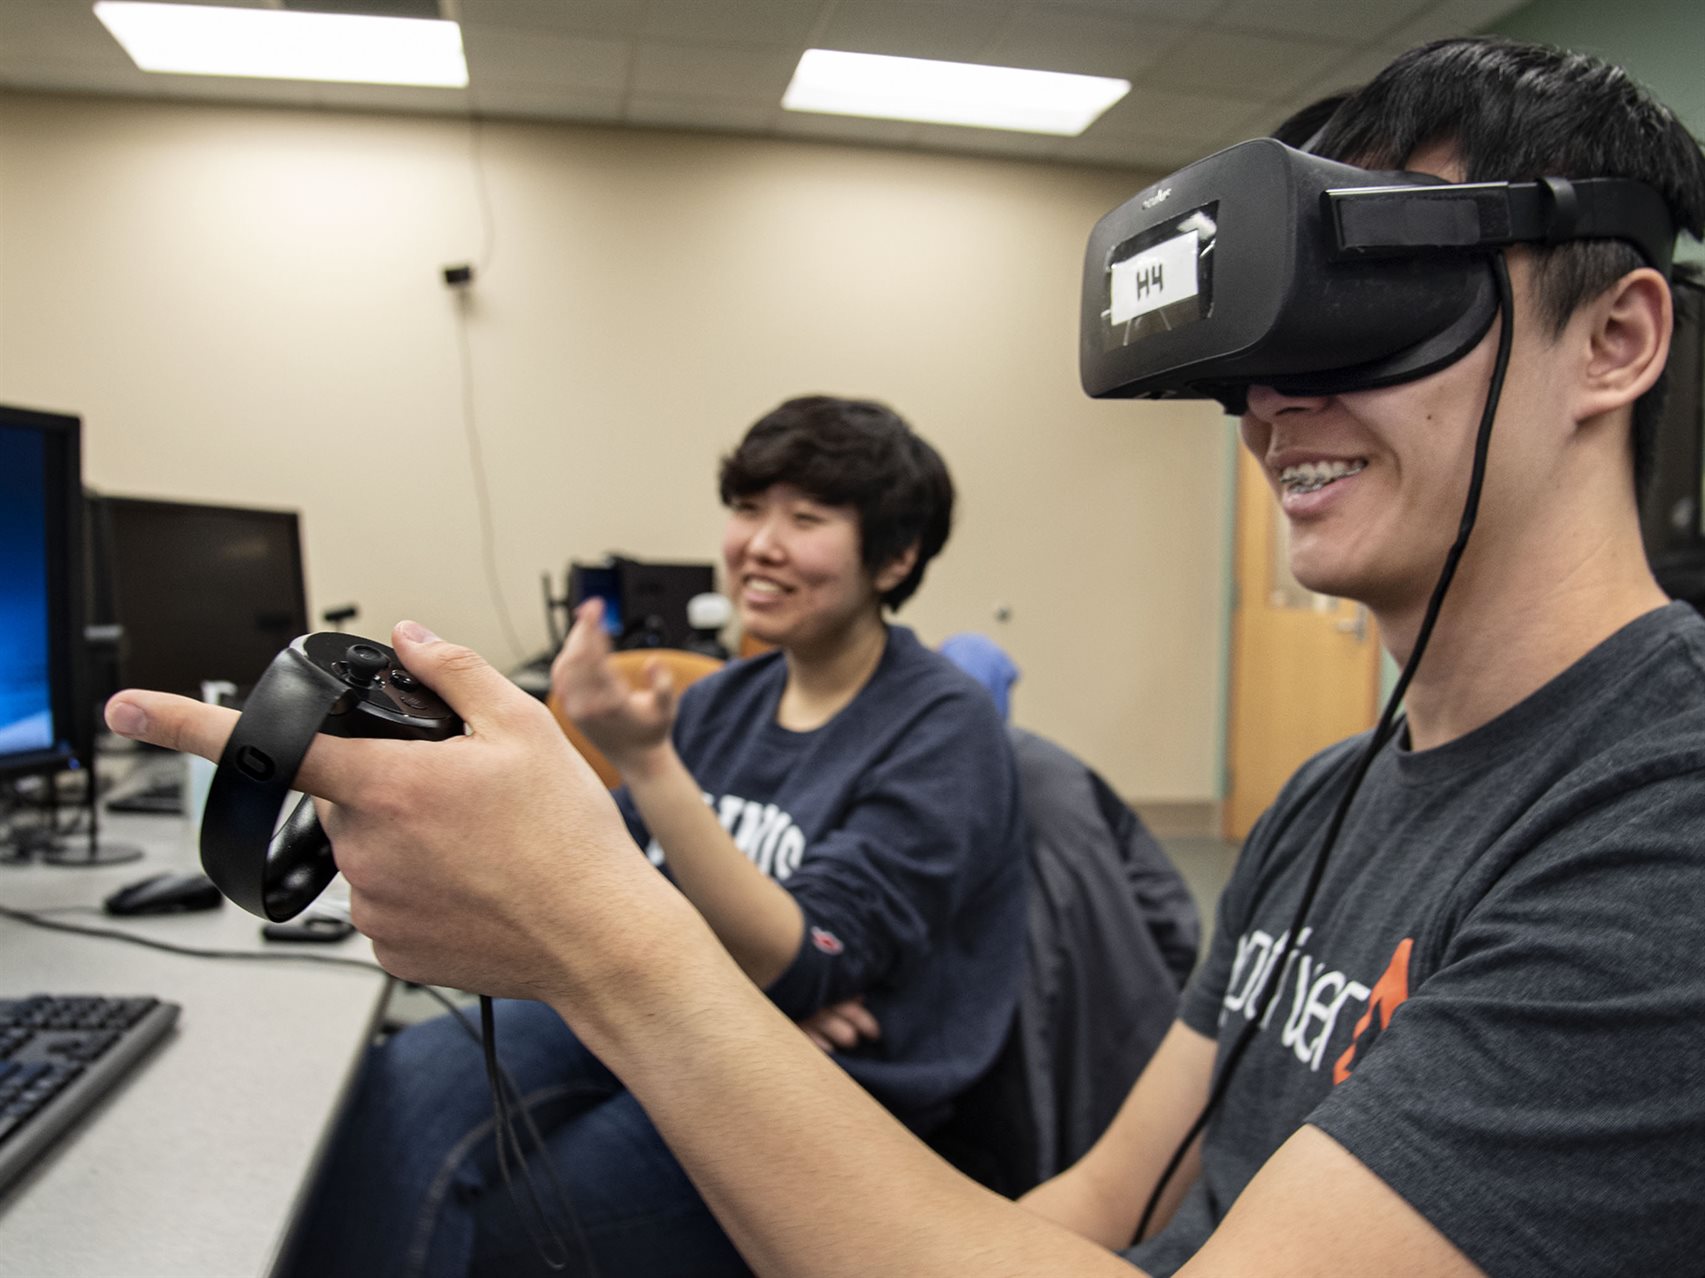 Students using VR headsets in computer lab.